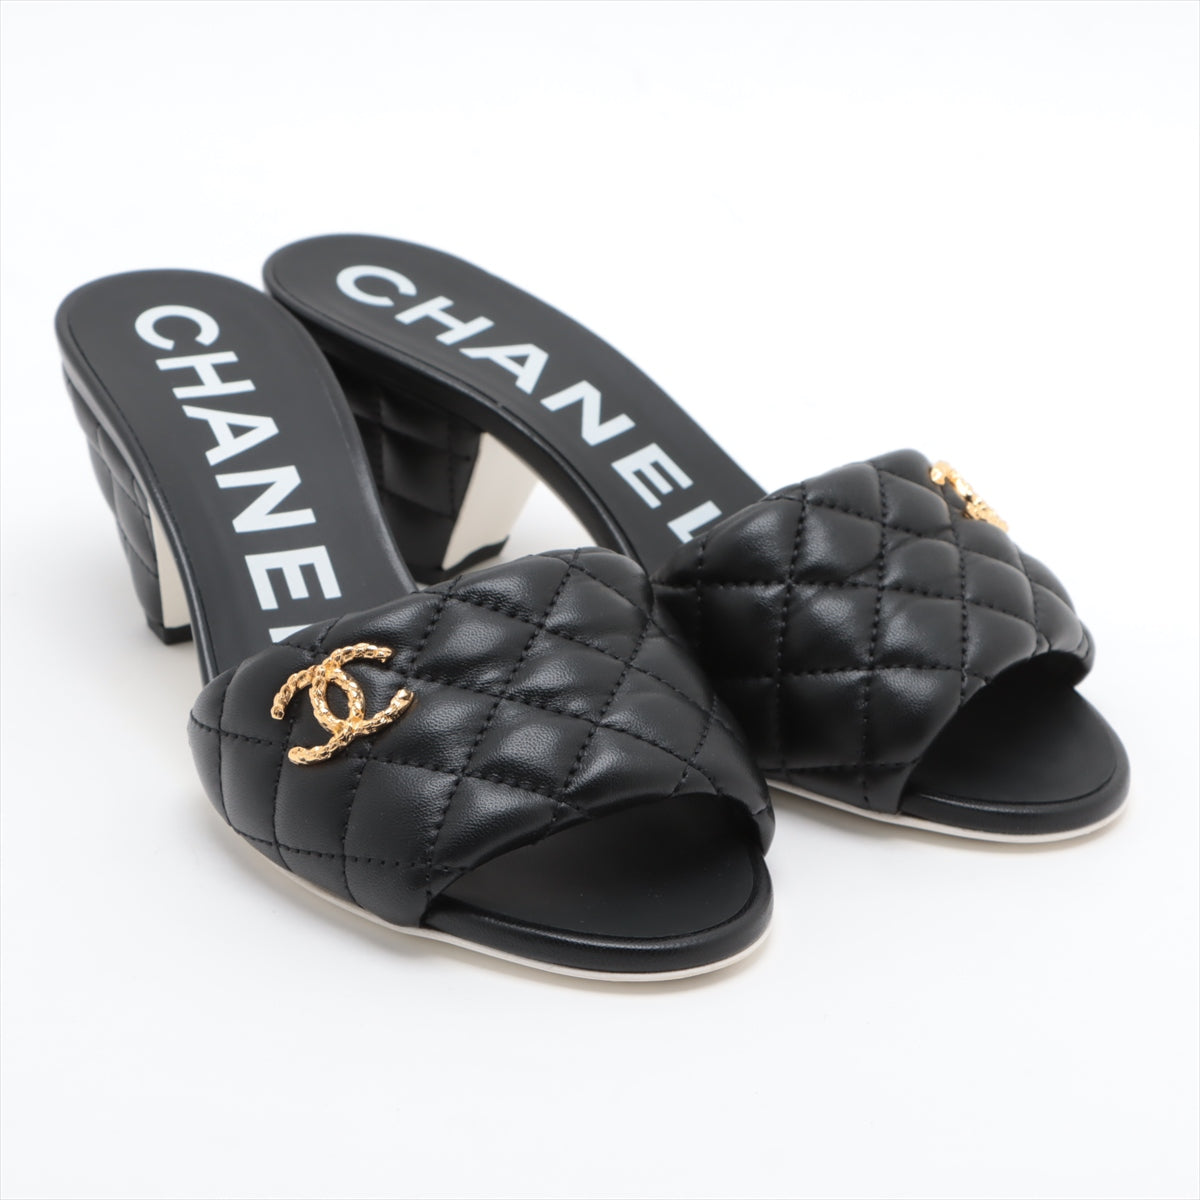 Chanel Coco Mark Matelasse Leather Sandals 36C Ladies' Black G38820 There is a bag